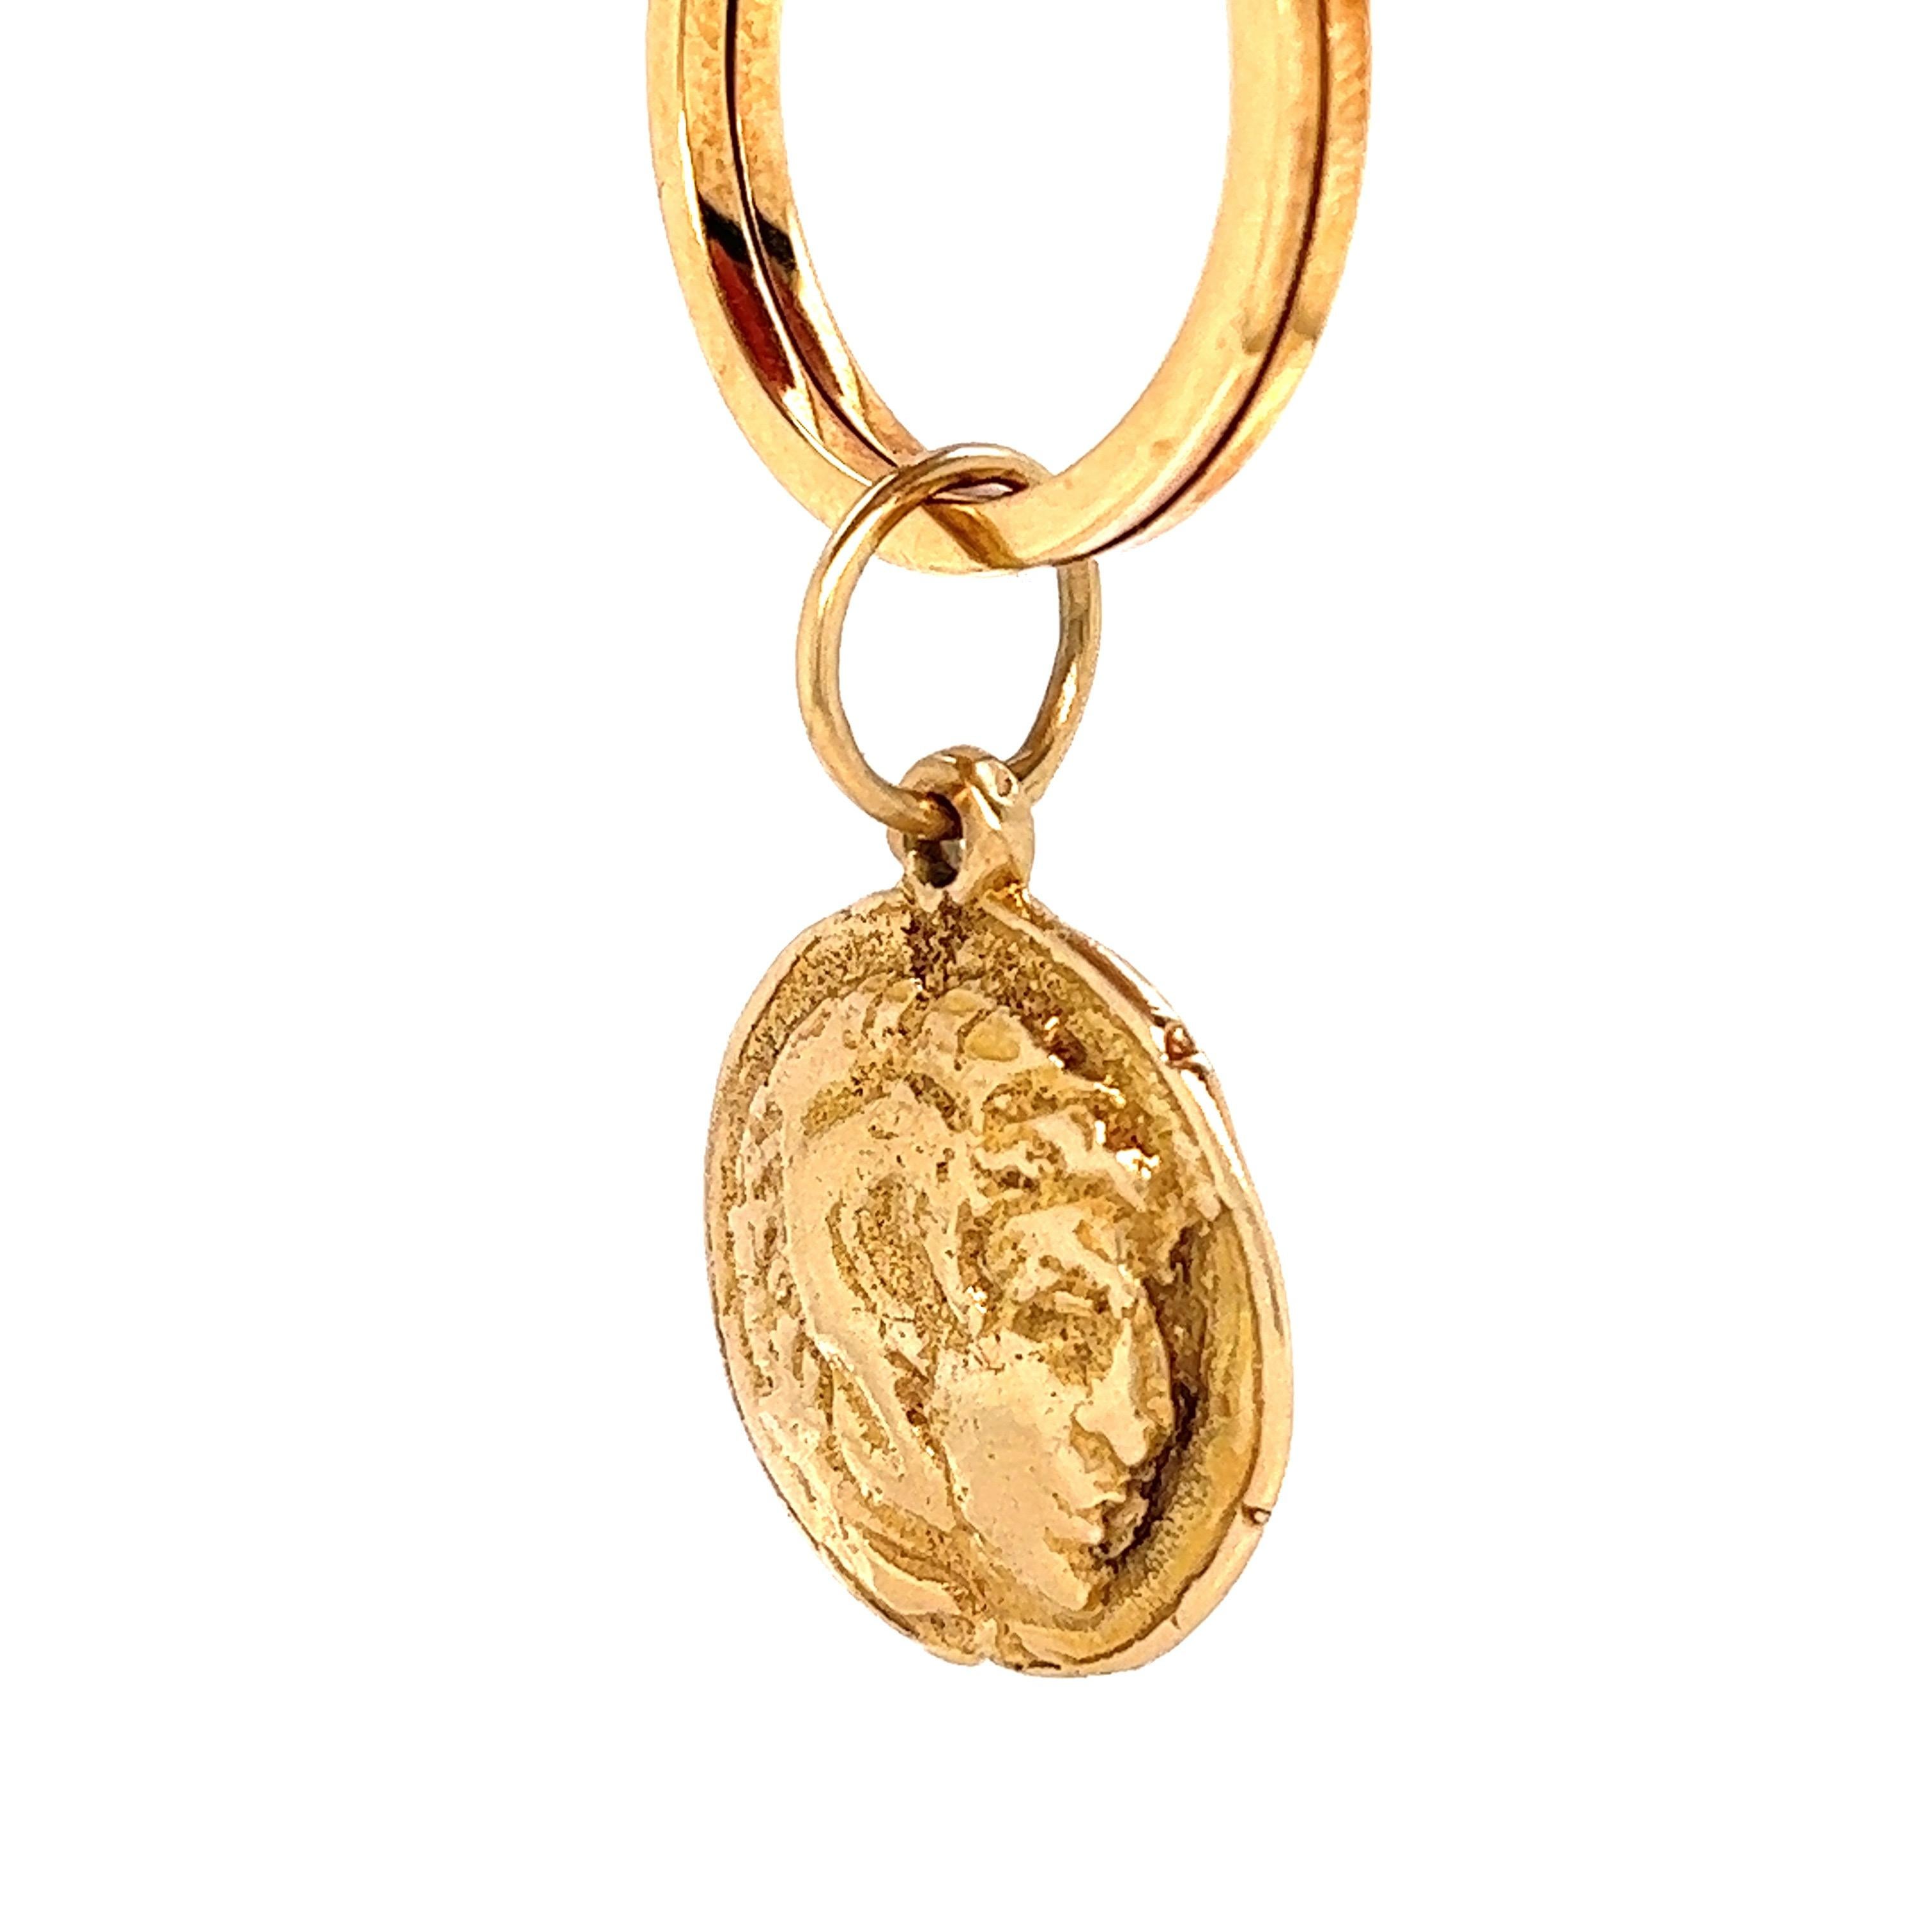 Women's or Men's Gold Coin Key Chain For Sale